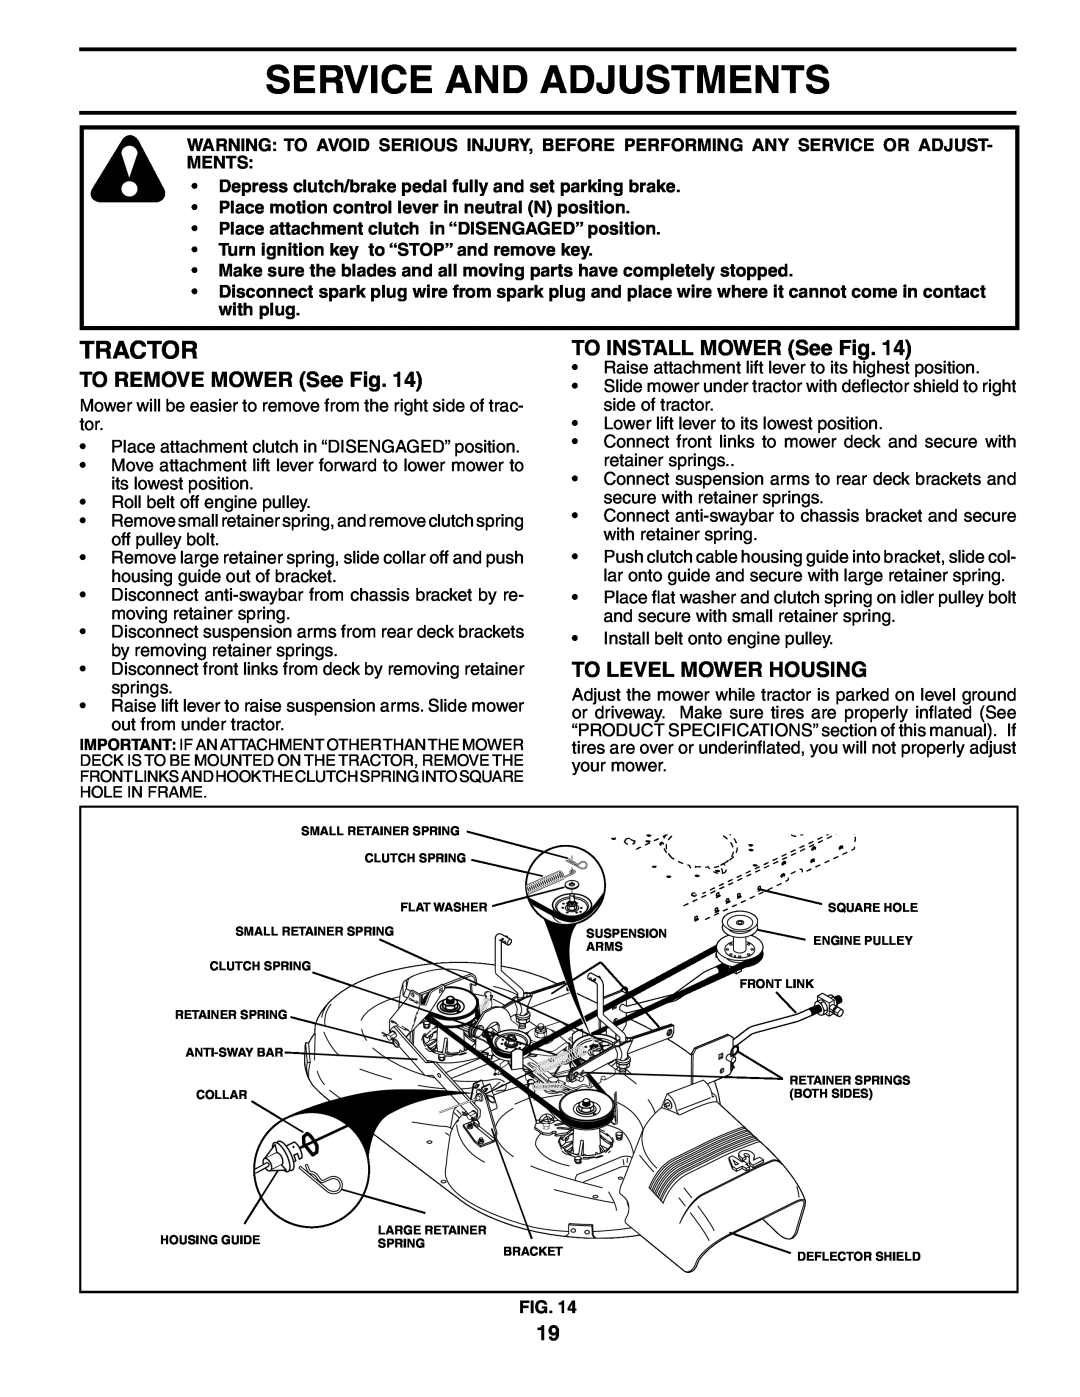 Poulan HD21H42 Service And Adjustments, TO REMOVE MOWER See Fig, TO INSTALL MOWER See Fig, To Level Mower Housing, Tractor 